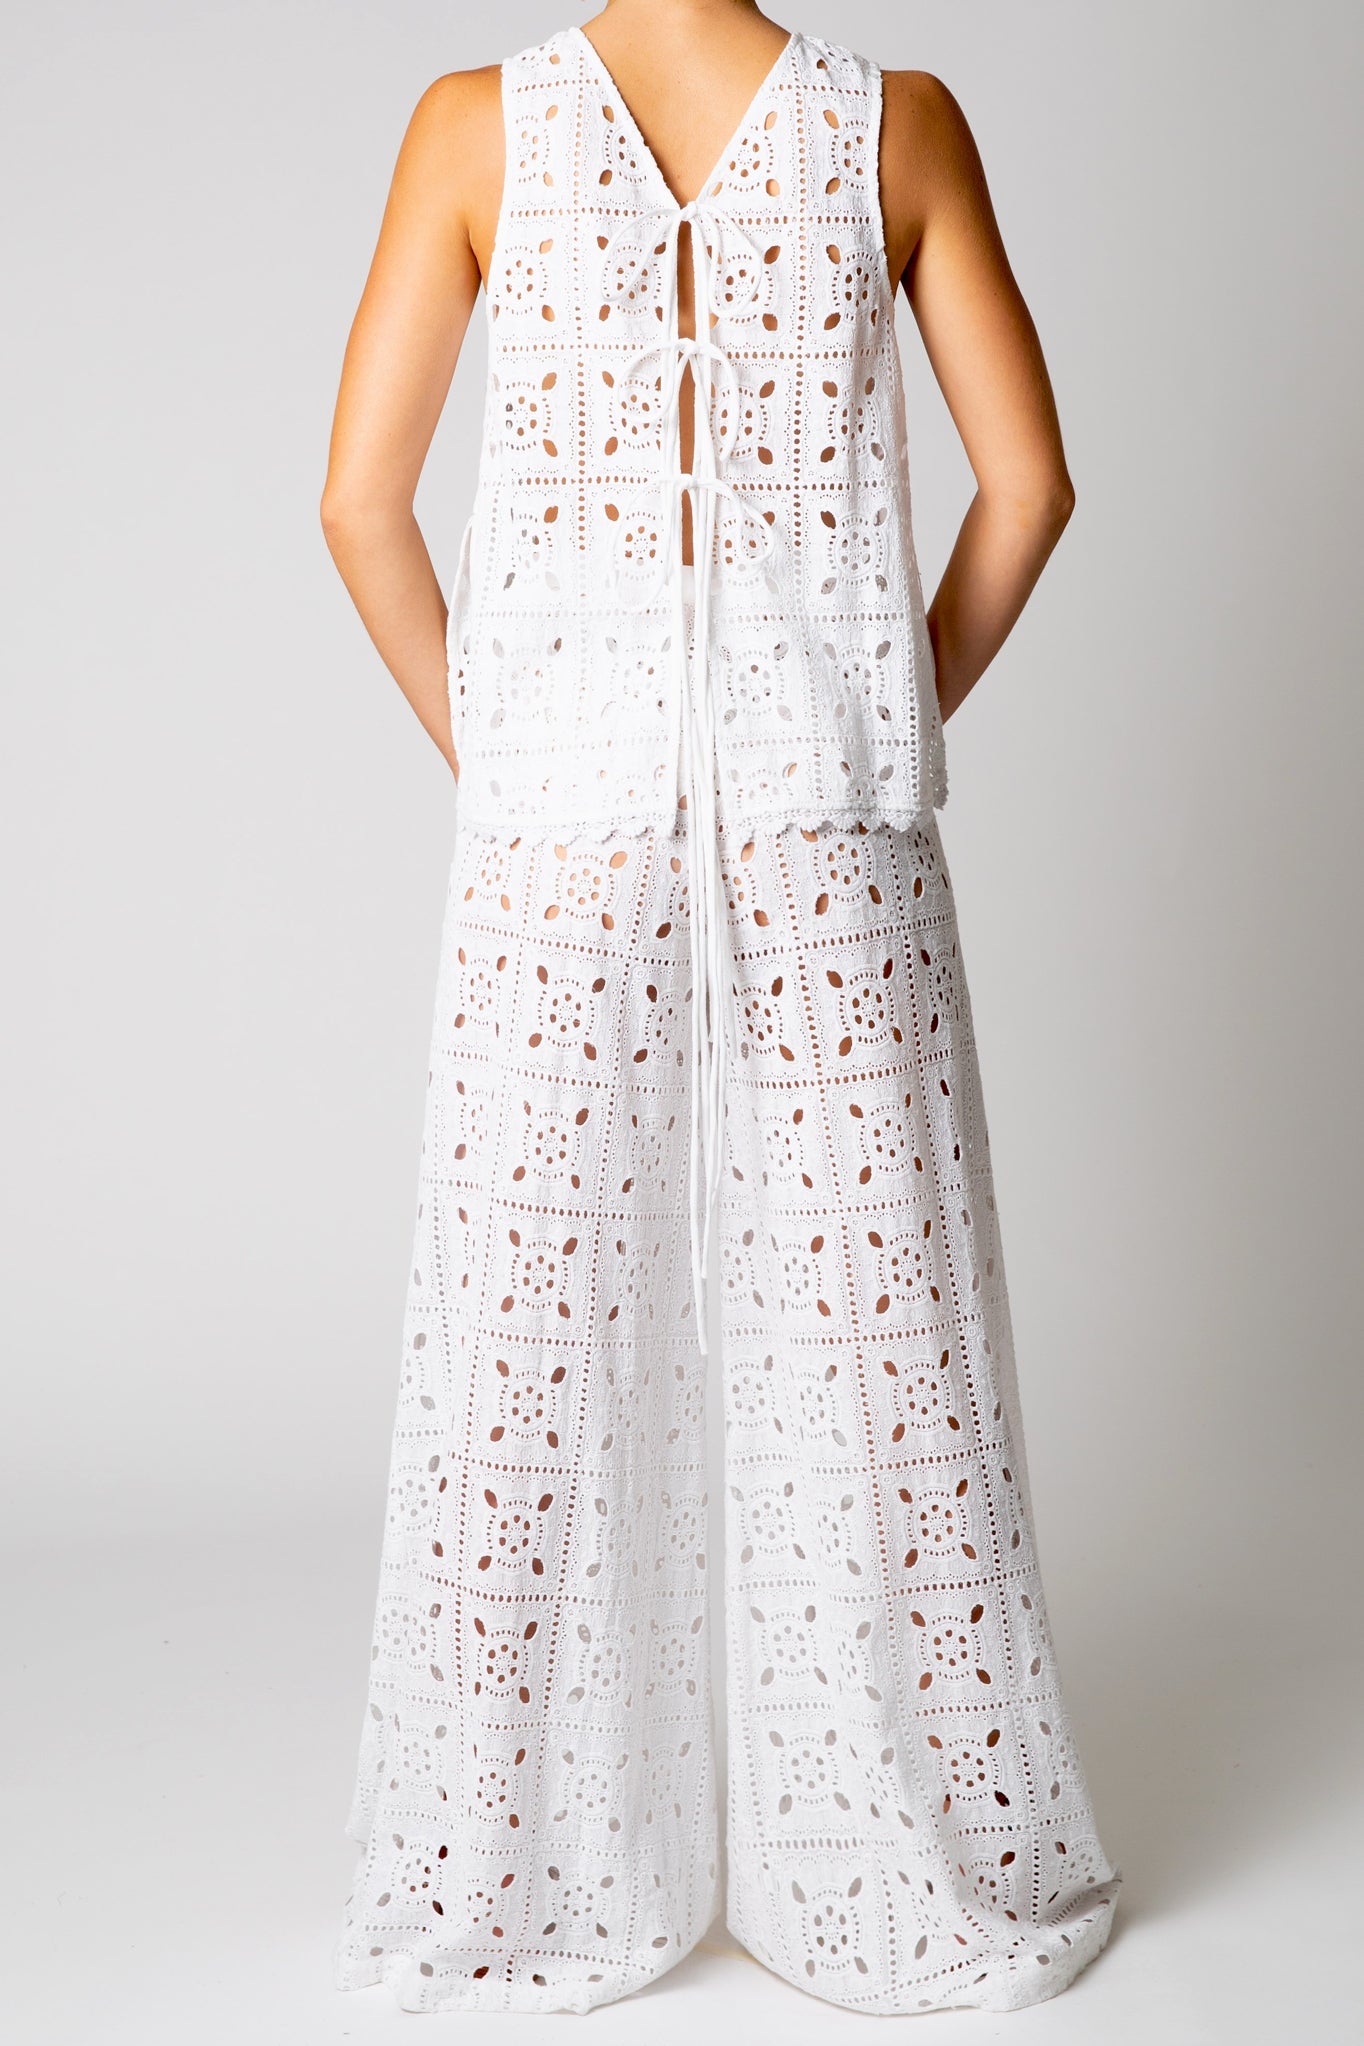 Tula Patchwork Eyelet Top by Miguelina